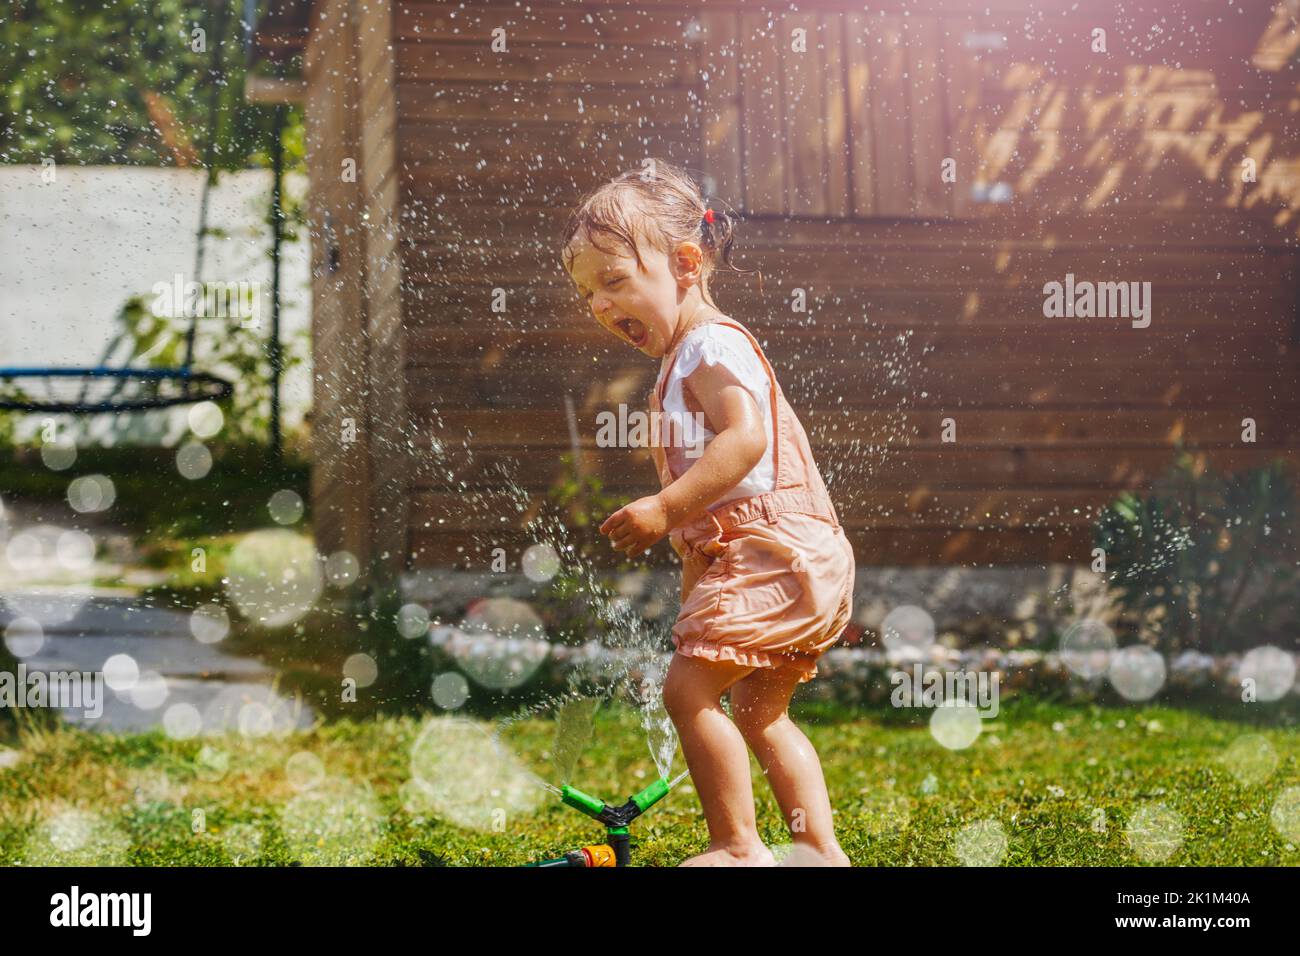 Beautiful girl in wet clothes play with sprinkler at garden Stock Photo